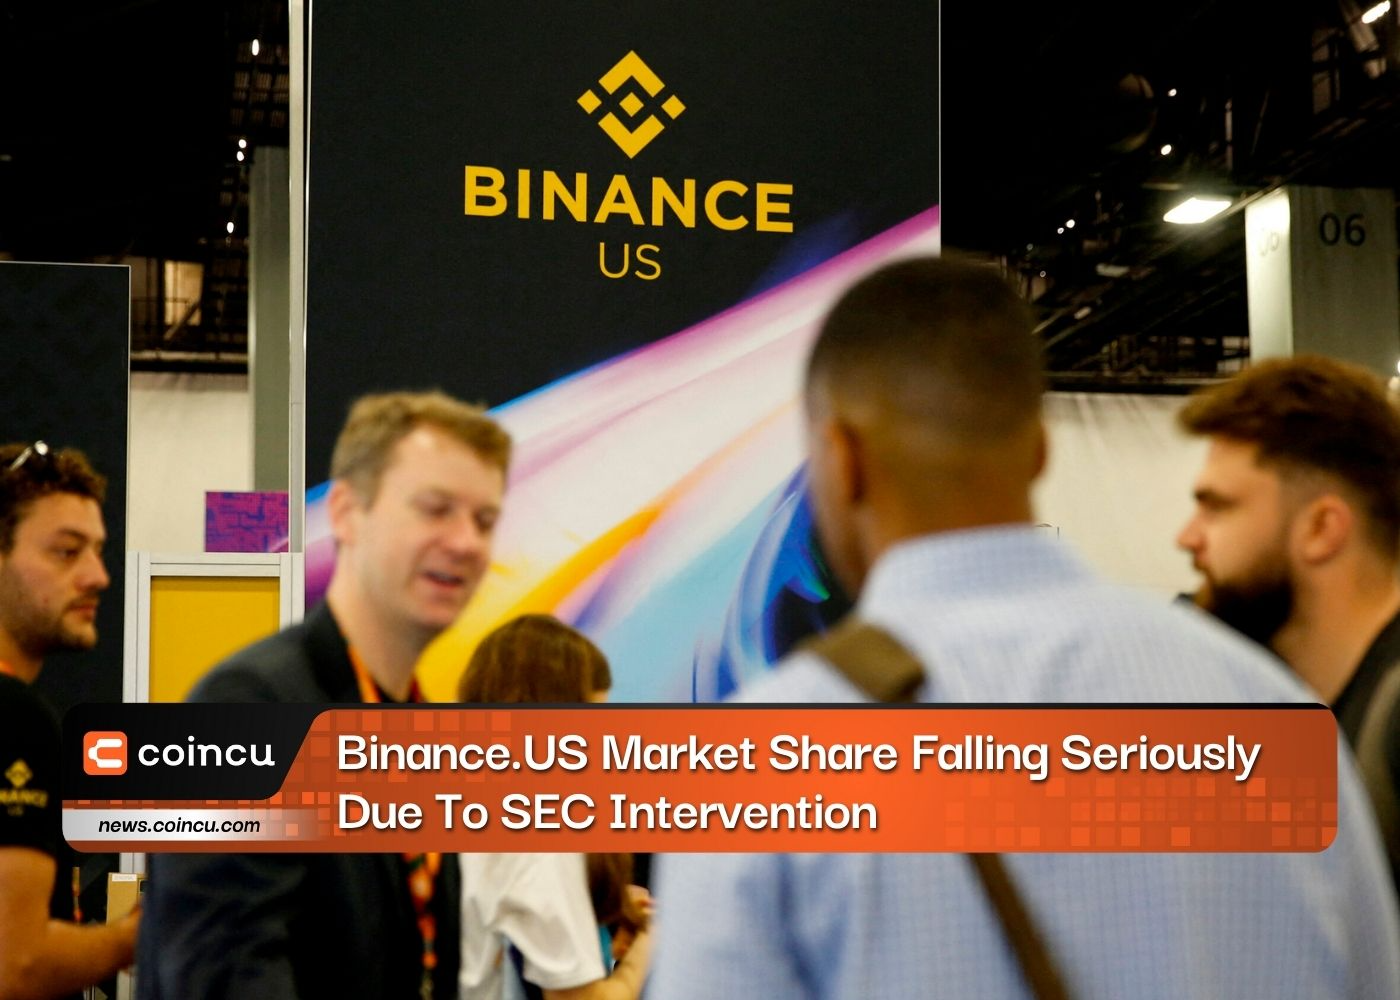 Binance.US Market Share Falling Seriously Due To SEC Intervention